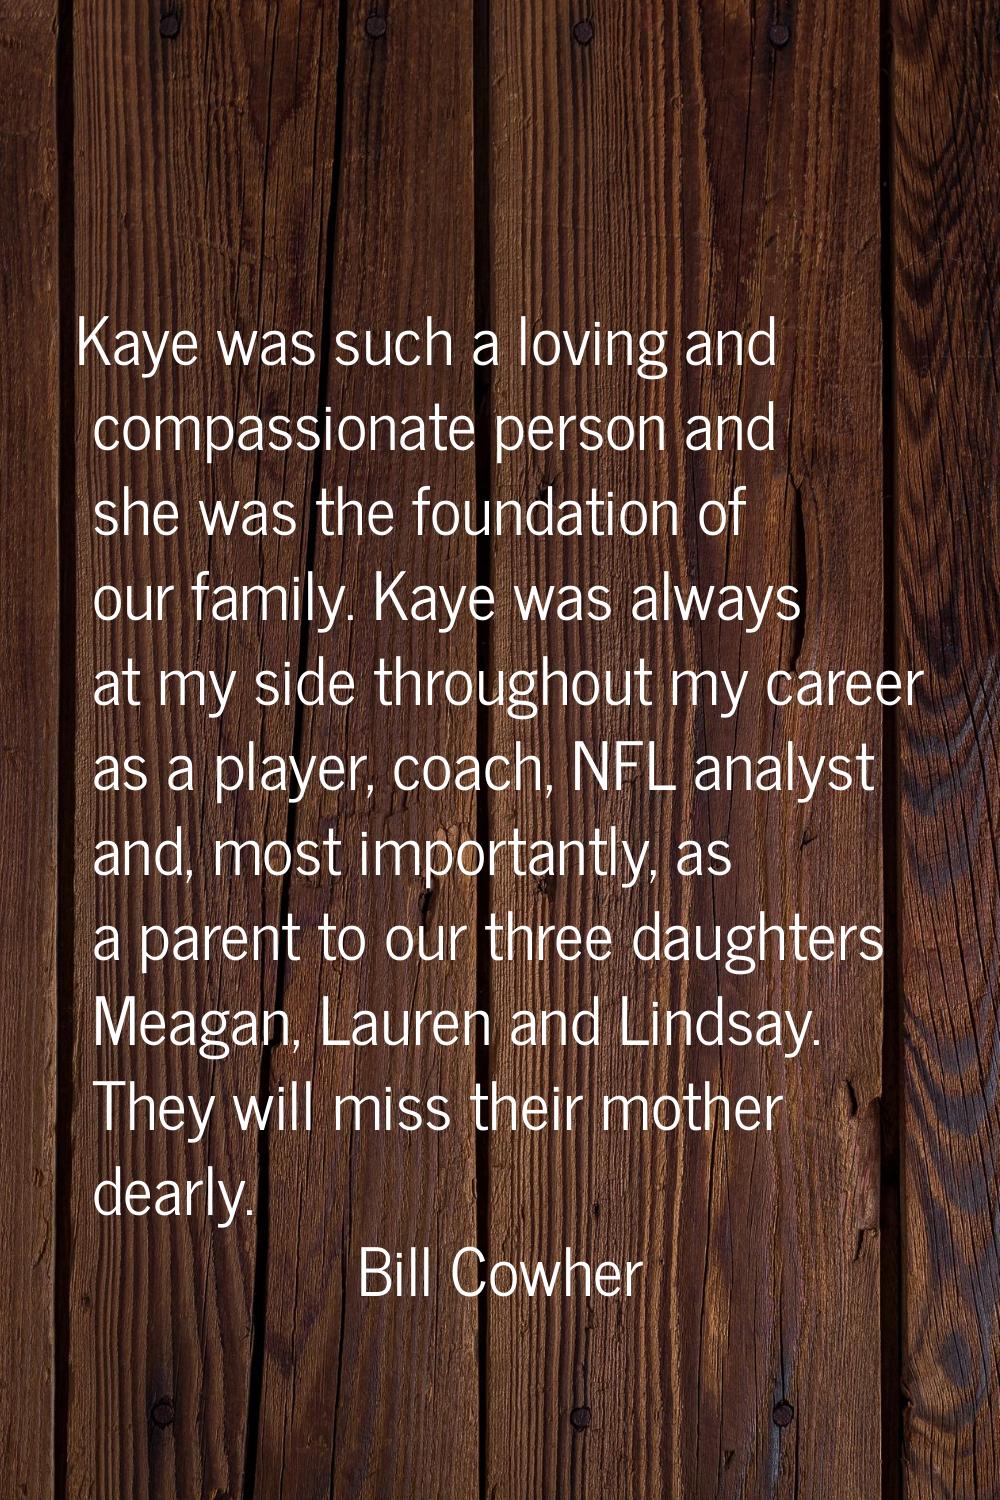 Kaye was such a loving and compassionate person and she was the foundation of our family. Kaye was 